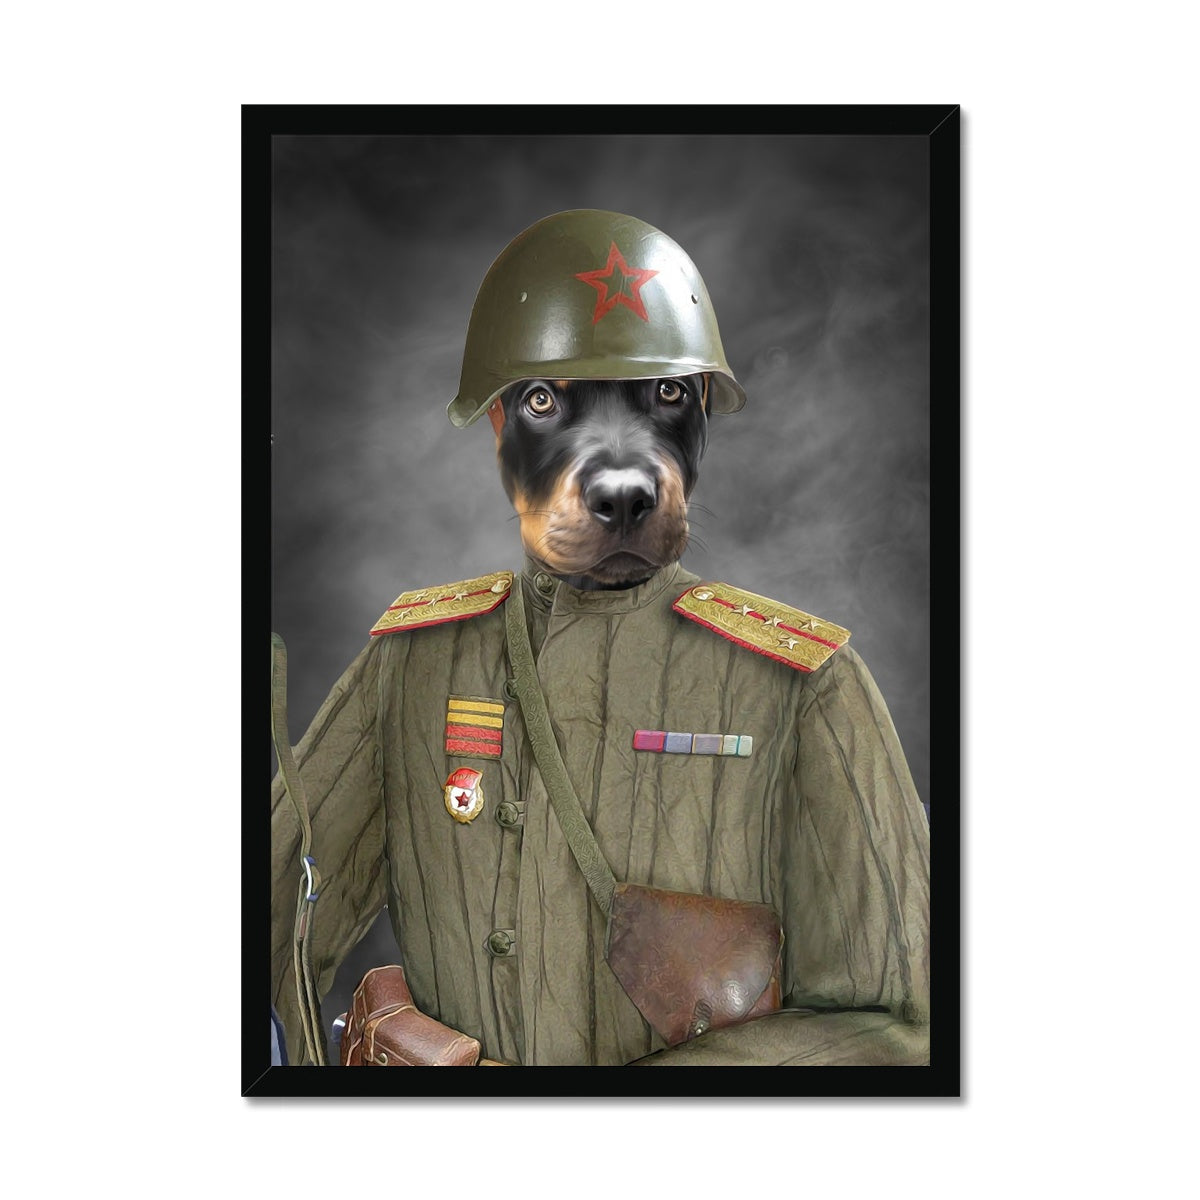 The World War Soldier: Custom Pet Portrait - Paw & Glory - #pet portraits# - #dog portraits# - #pet portraits uk#dog paintings, turn pet photos to art, painting pets, pet portraits in oils, dog portrait painting, Pet portraits, custom dog portrait, painting of pet, Paw and Glory, paintings of pets from photos, painting of your dog